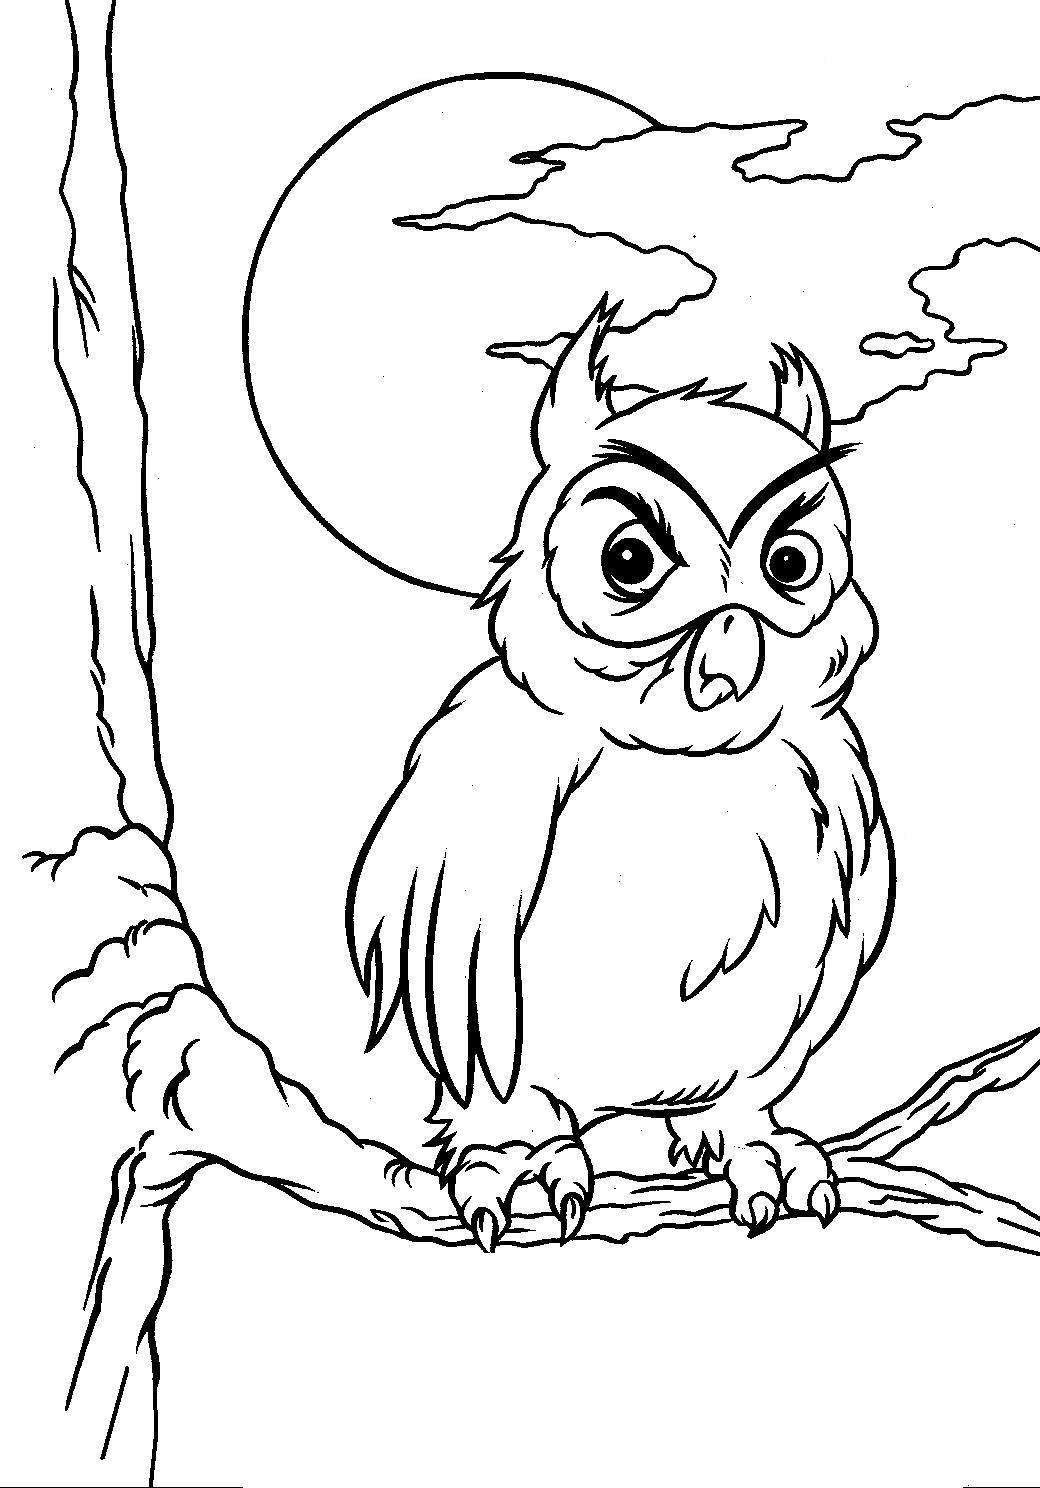 Angry Owl Coloring Page for Halloween Activities - Print Color Craft